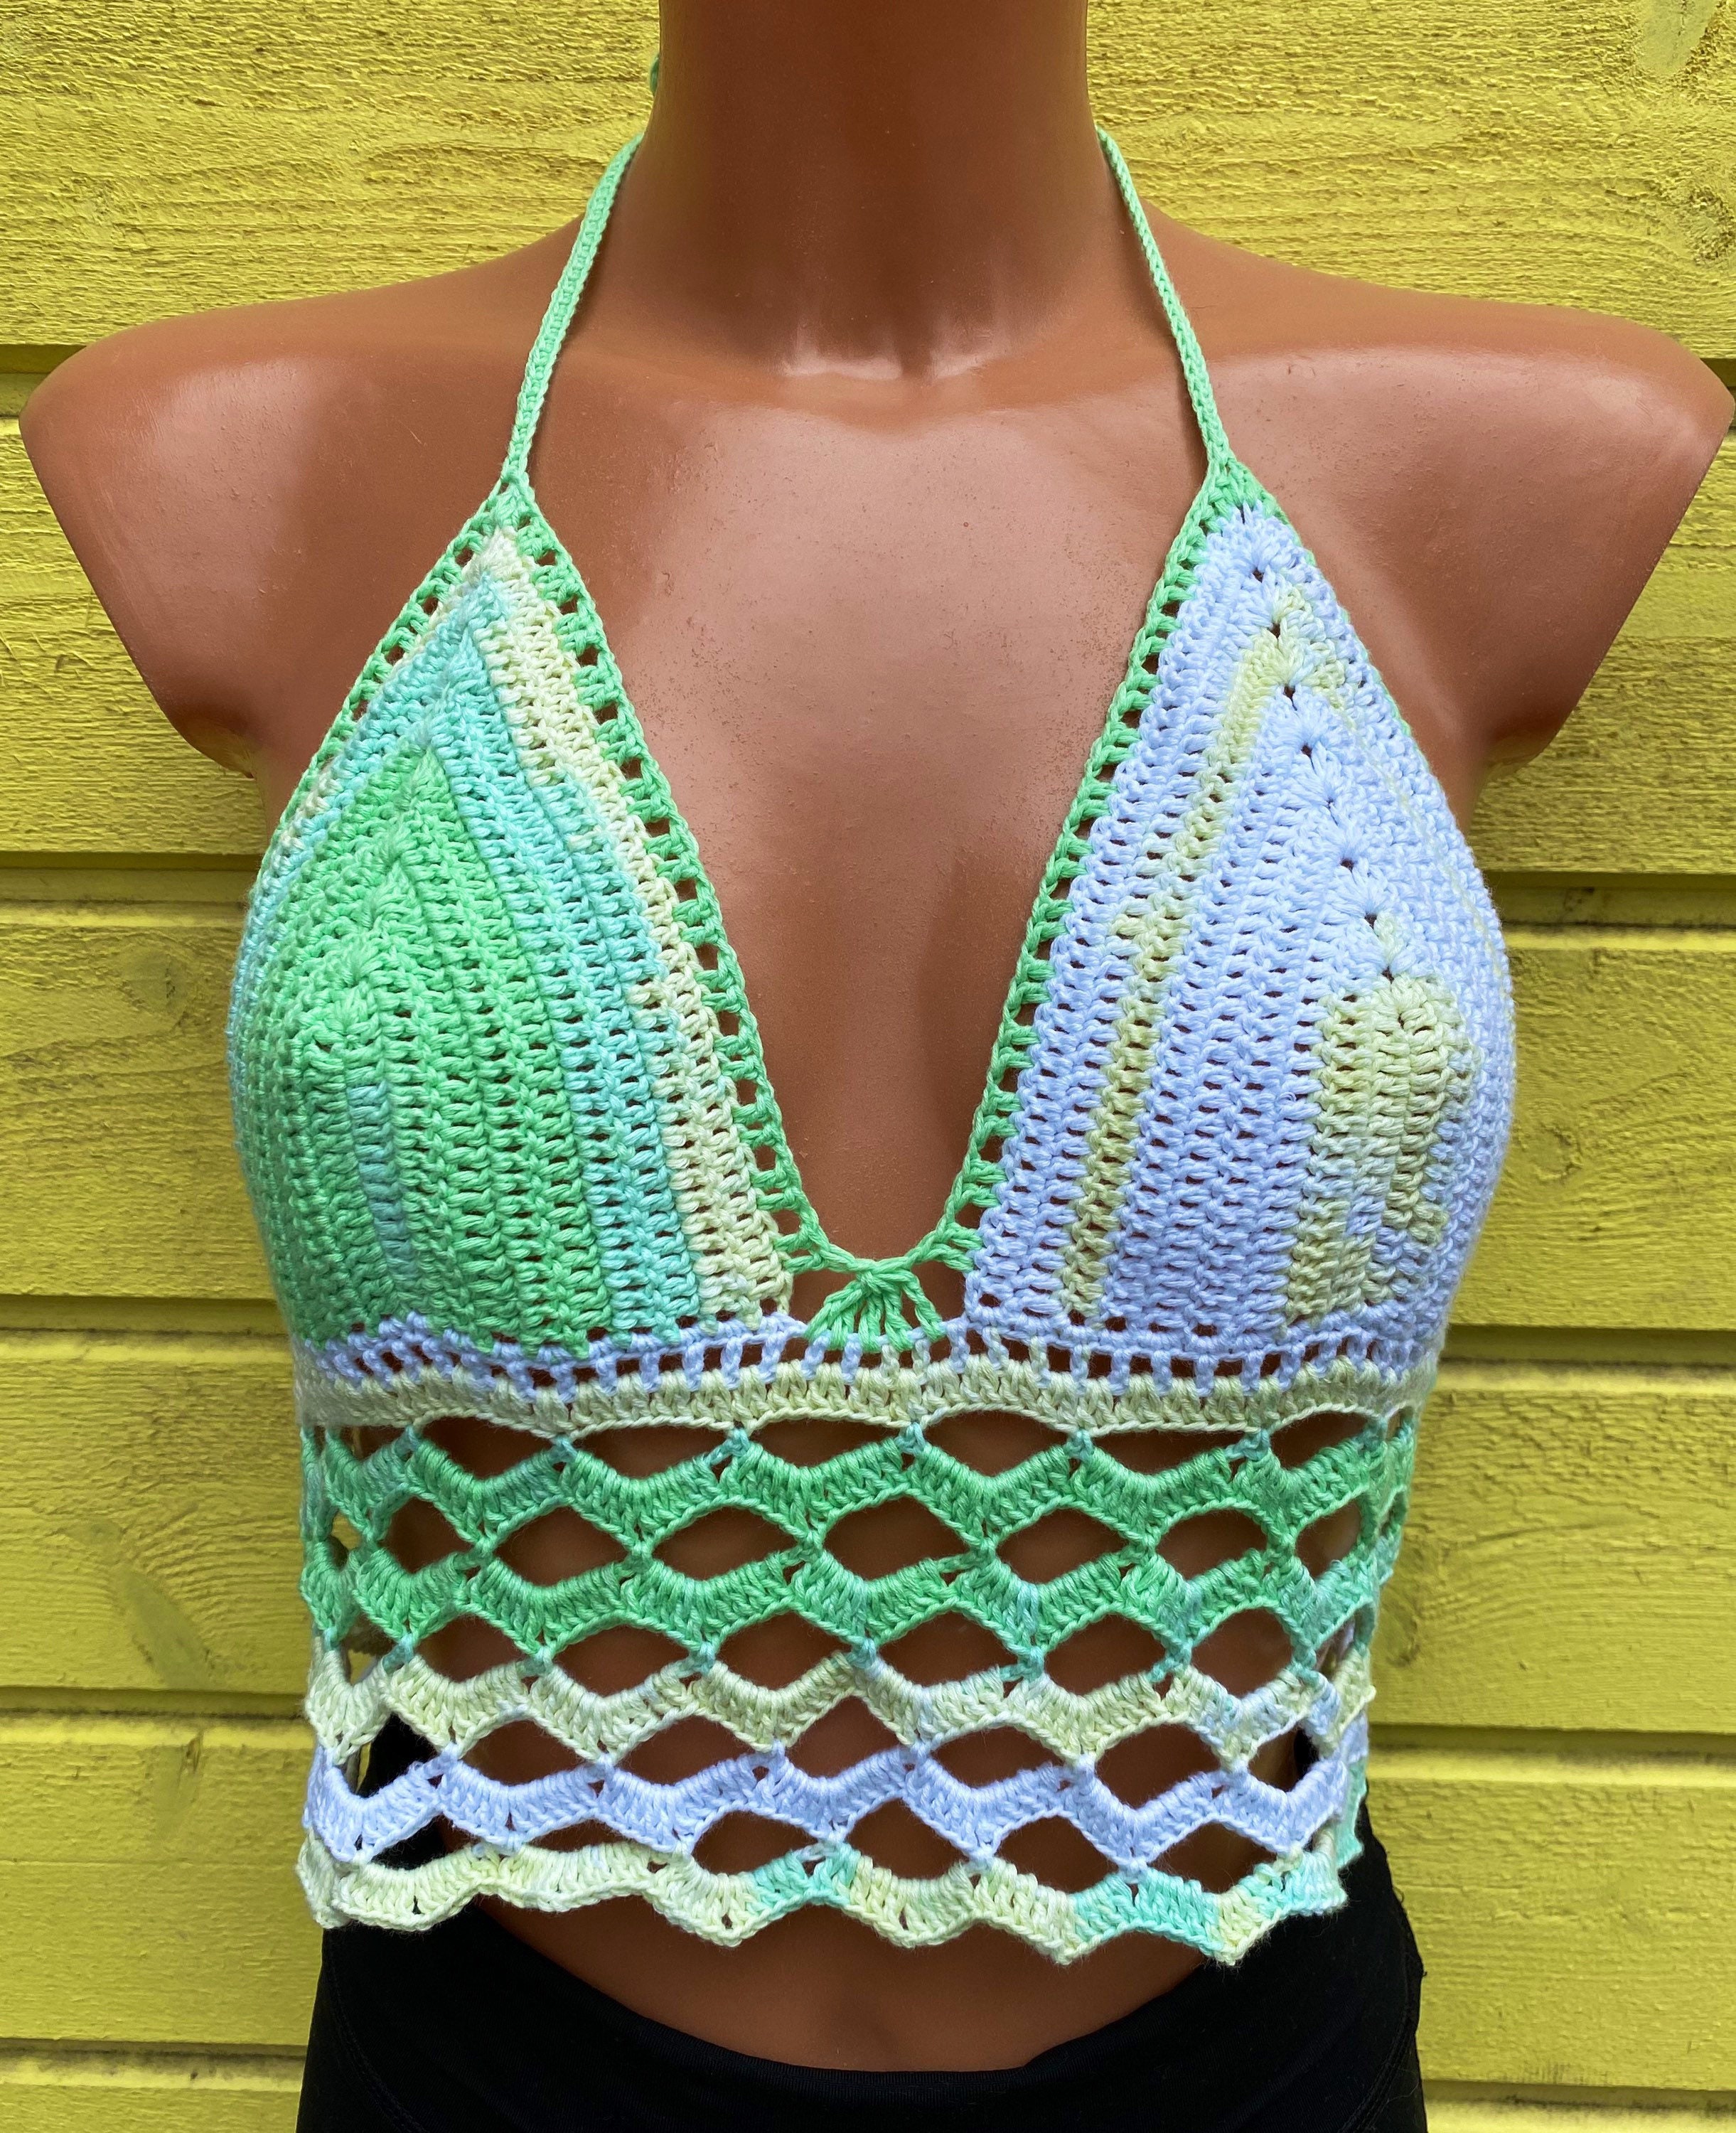 Cotton Yarn and Hippie Style Gift for Everyone Green Boho Style Handmade Crop Top Custom Knit Crop Top Gift for Women Crochet Bralette